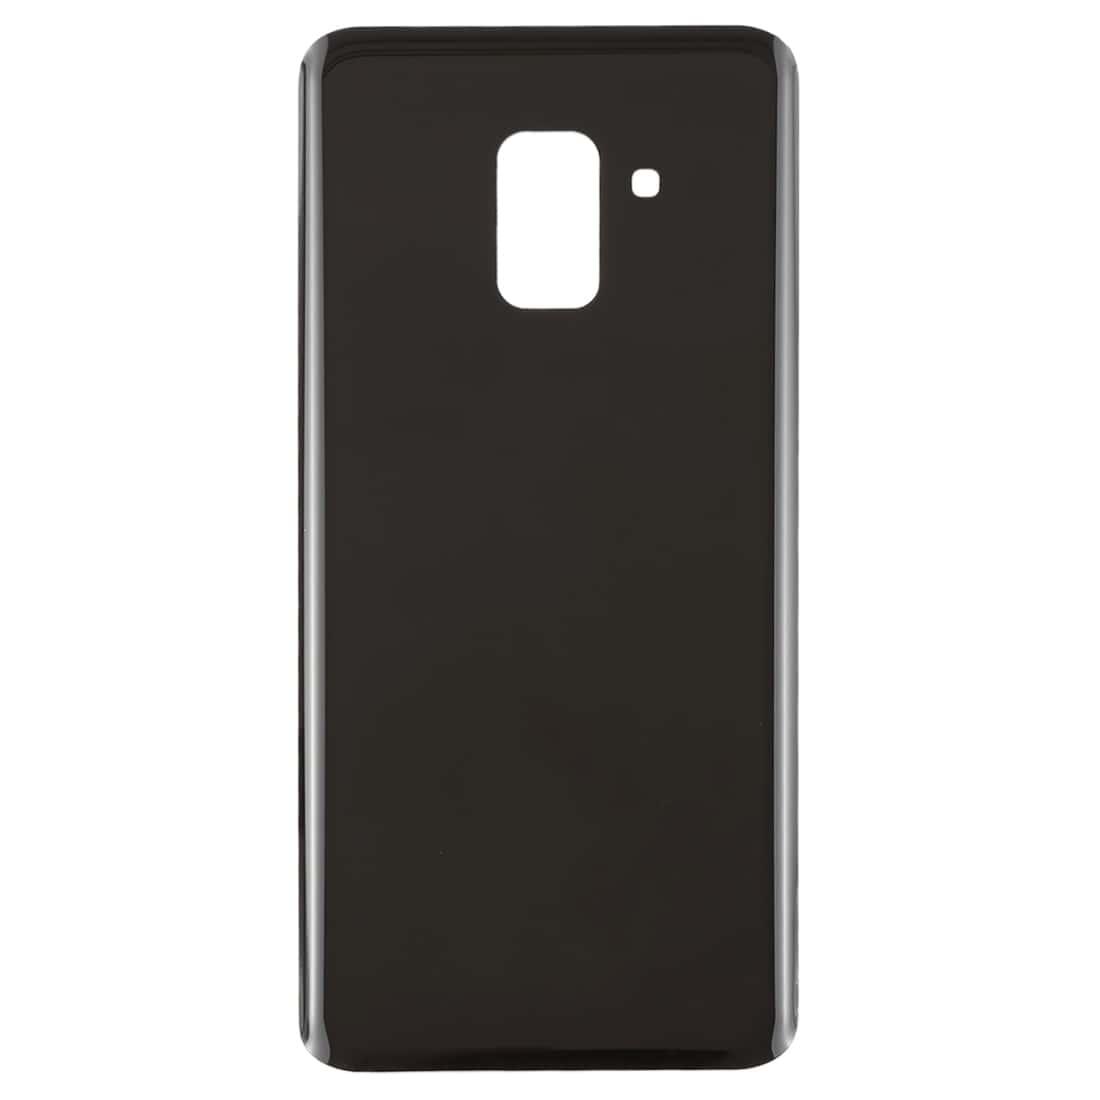 Back Glass Panel for  Samsung Galaxy A8 2018 A530 Black